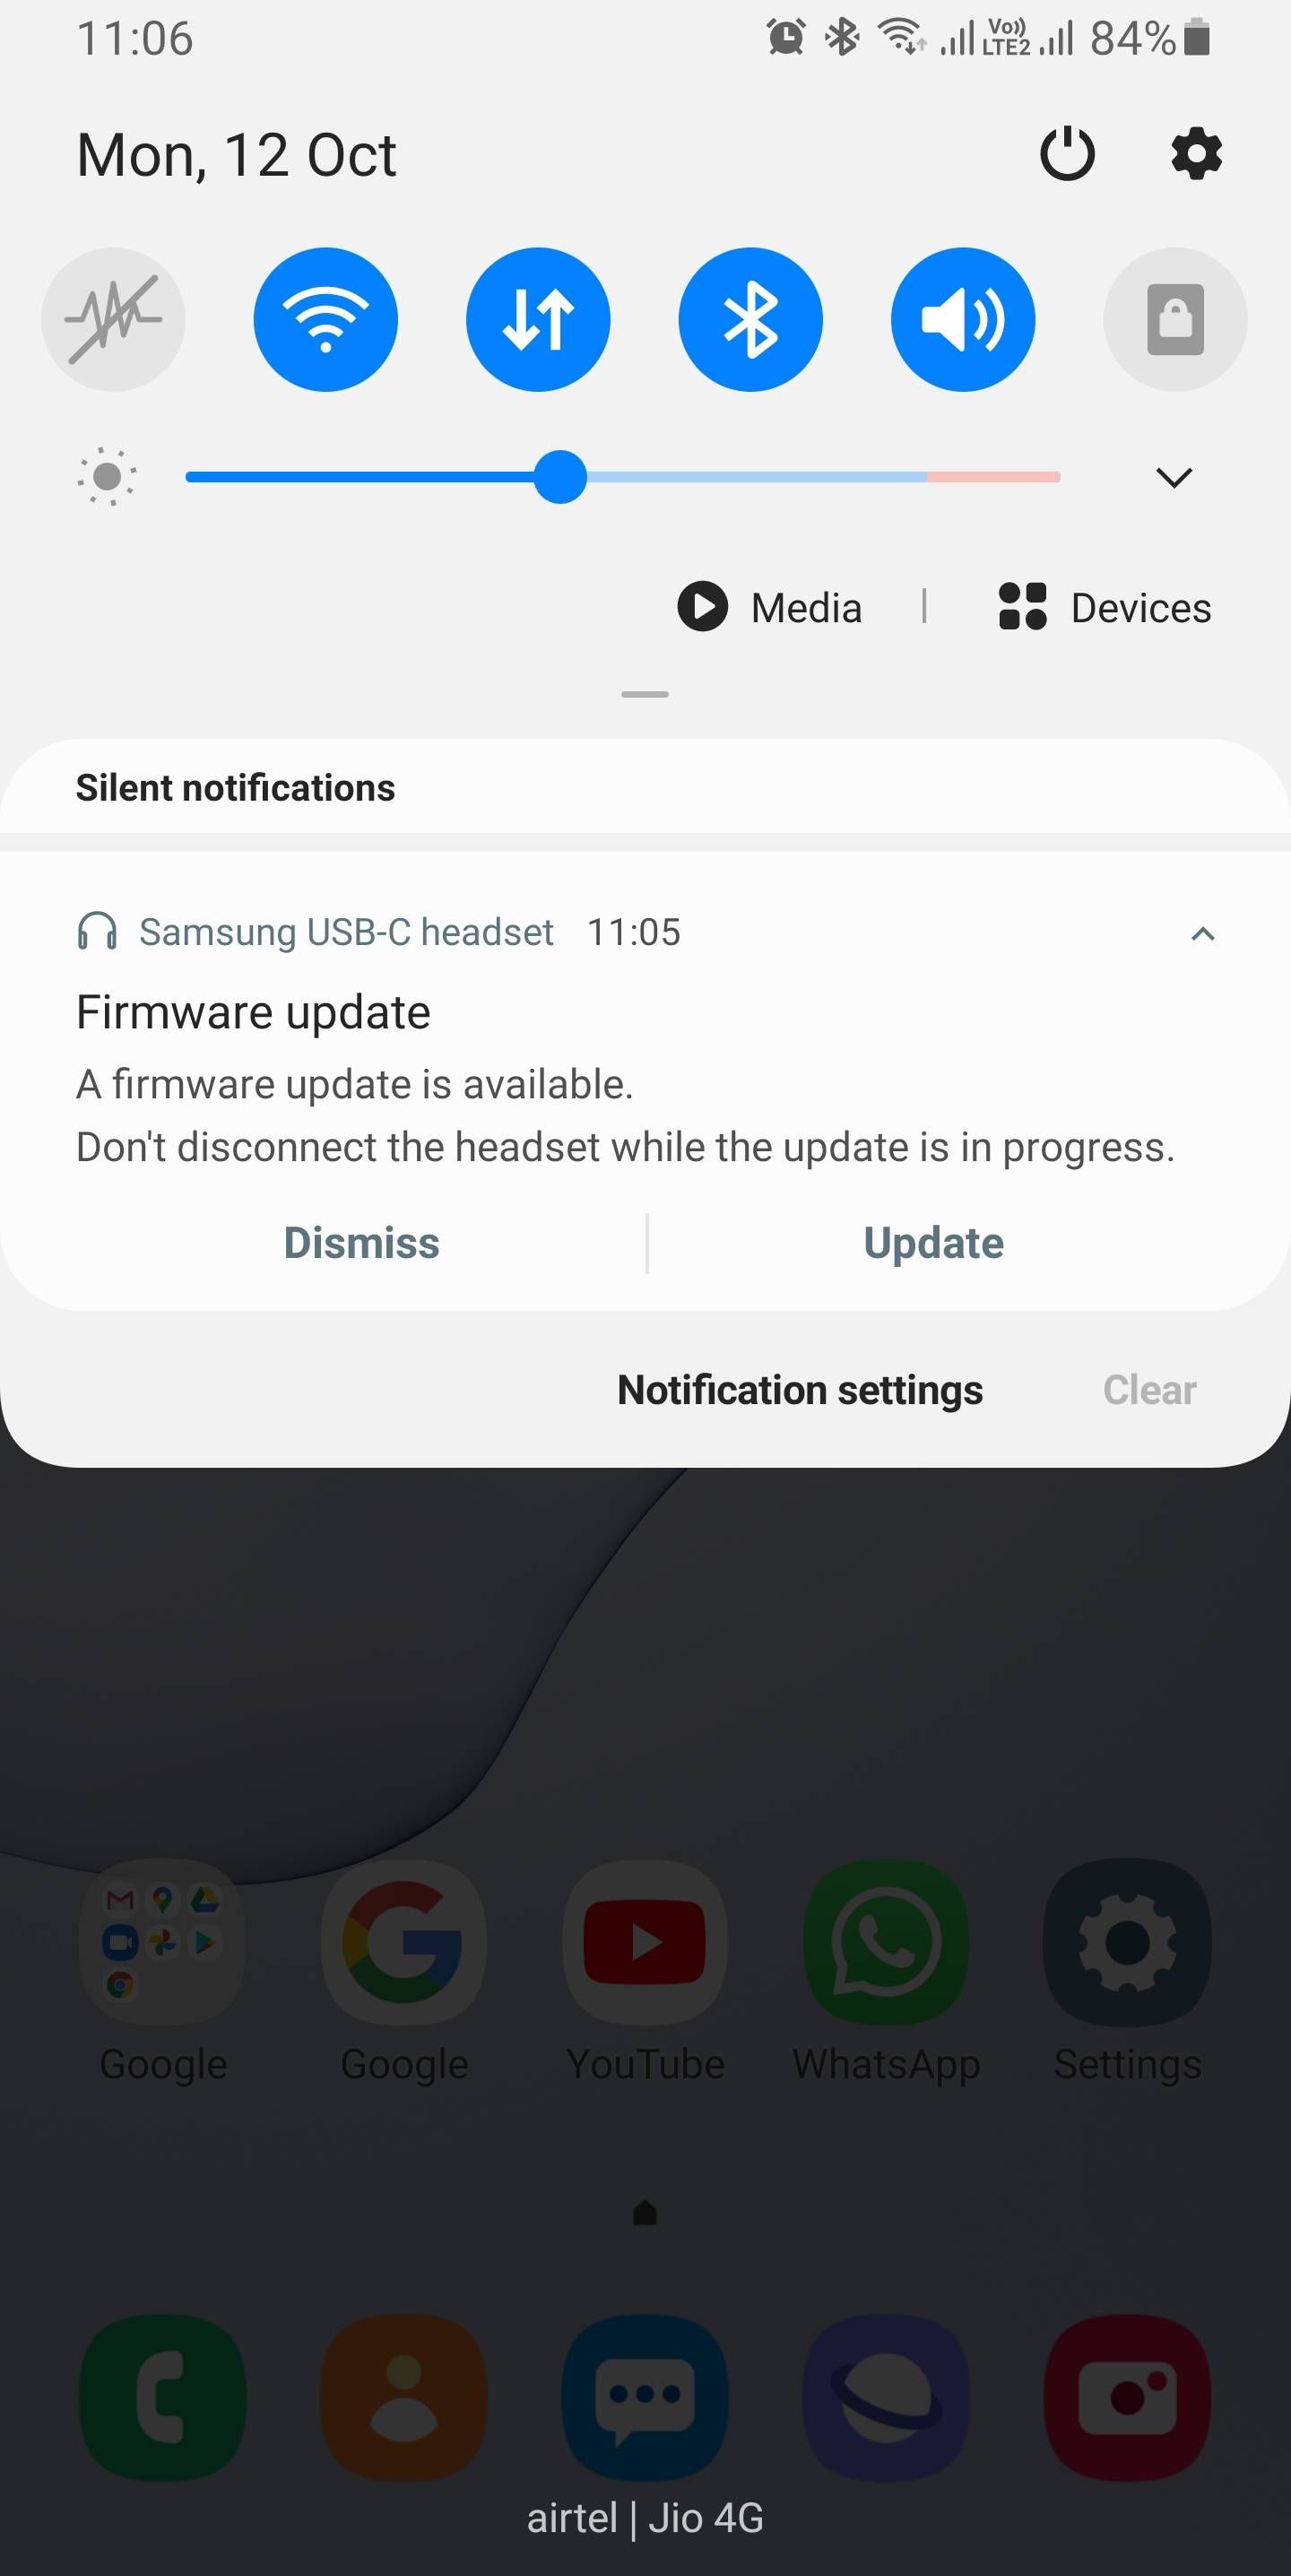 Firmware Update available for USB-C headset - Samsung Members